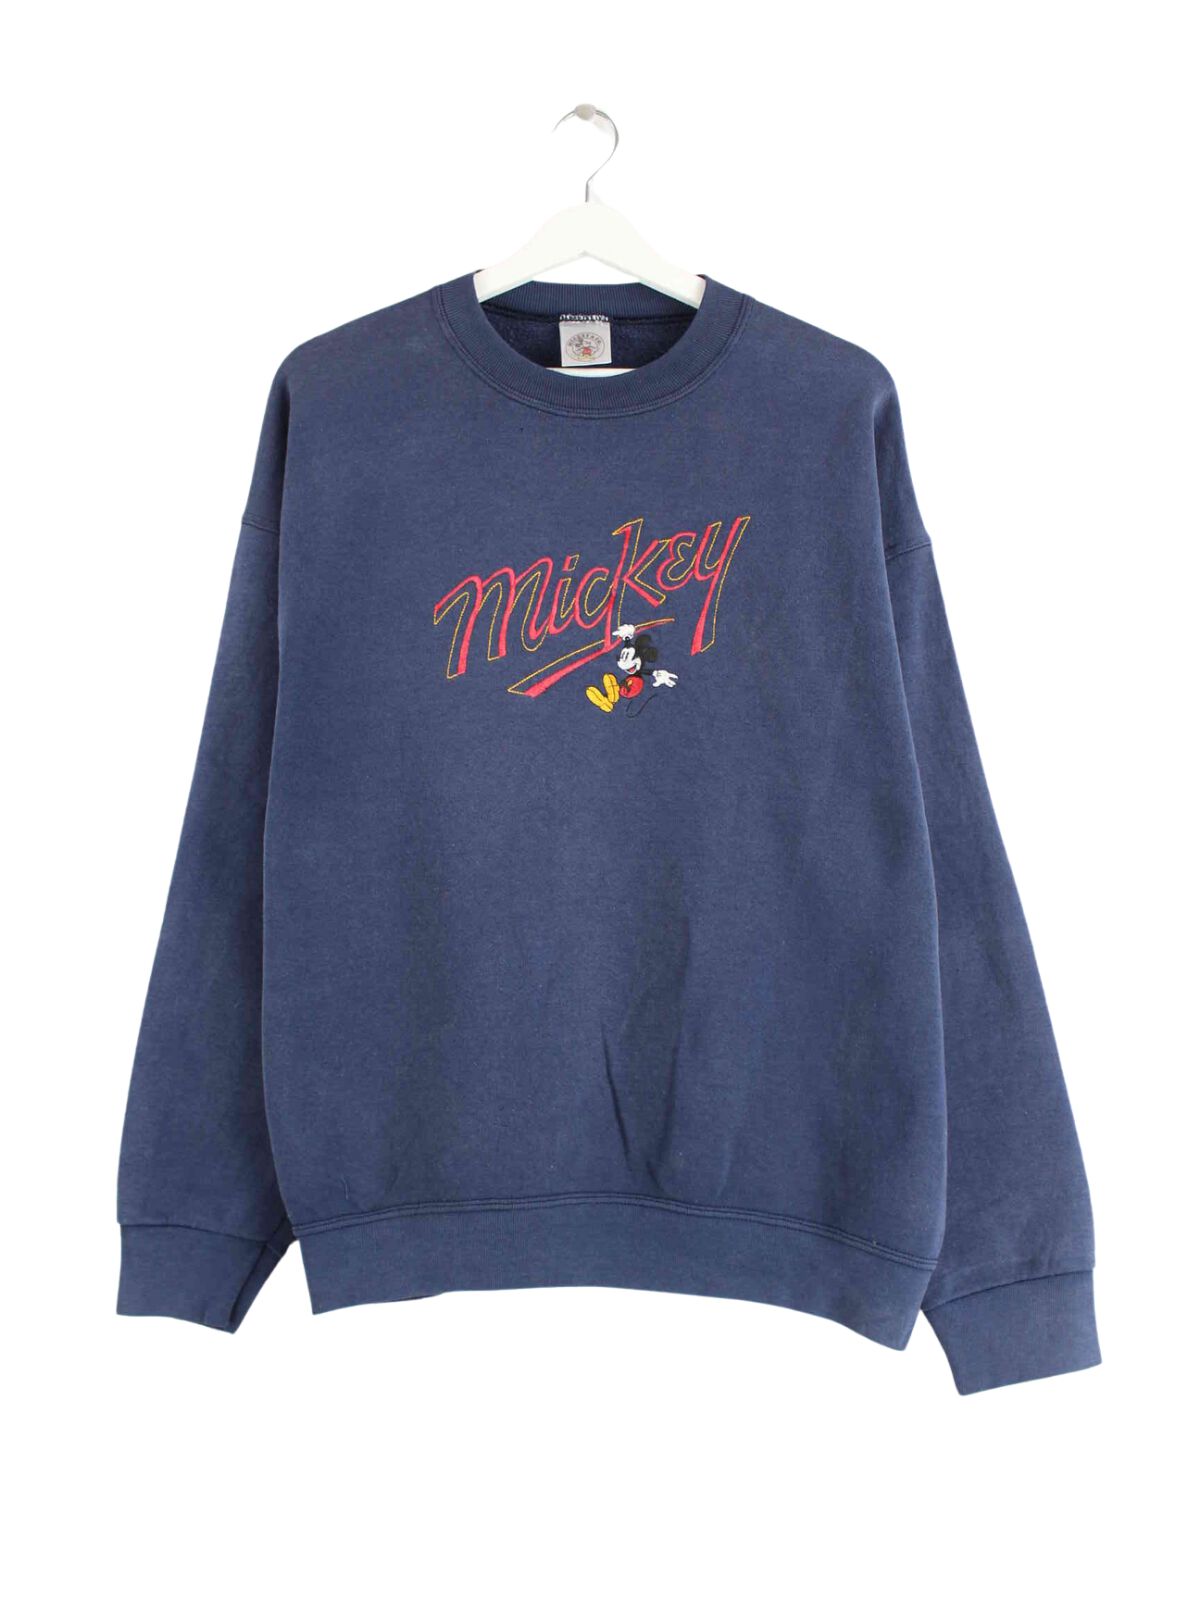 Disney )90s Vintage Mickie Embroidered Sweater Blau L (front image)